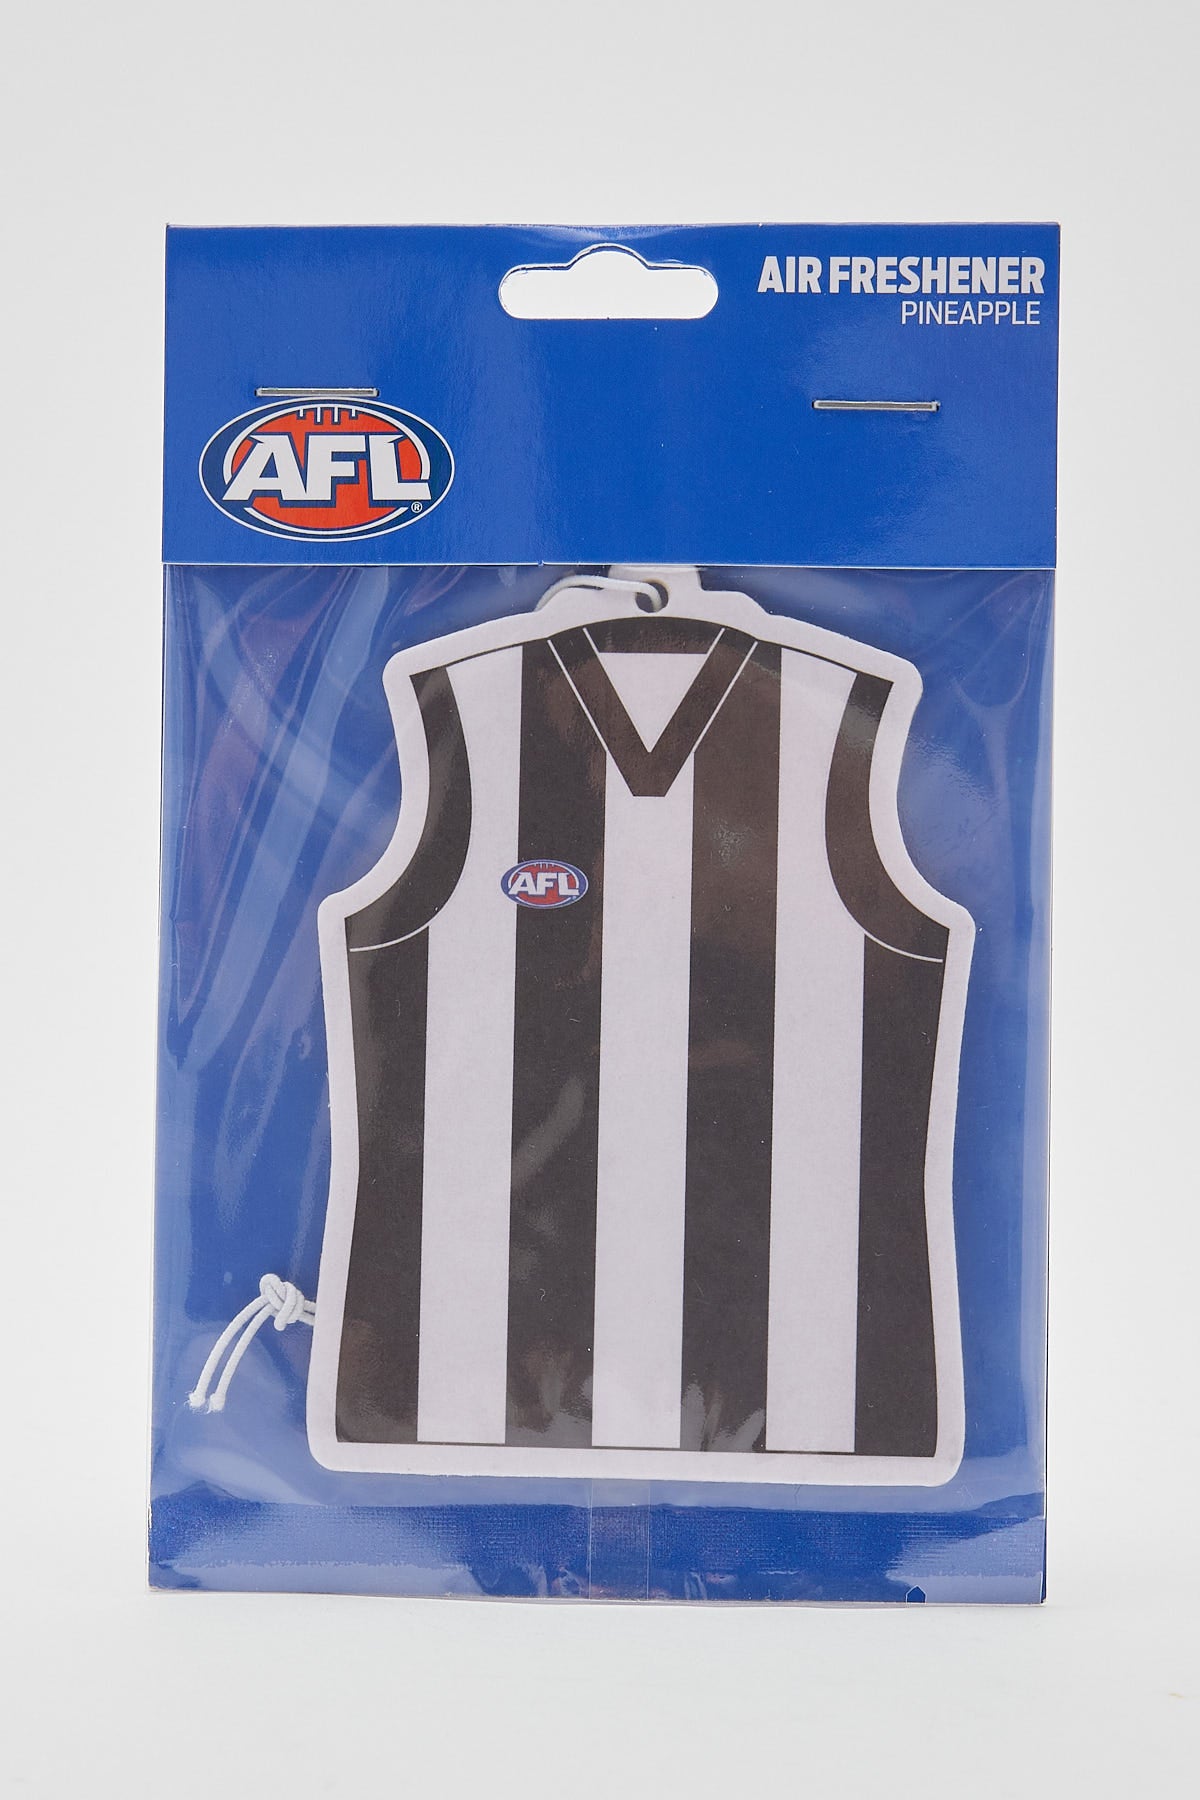 Pro & Hop Collingwood Magpies Guernsey